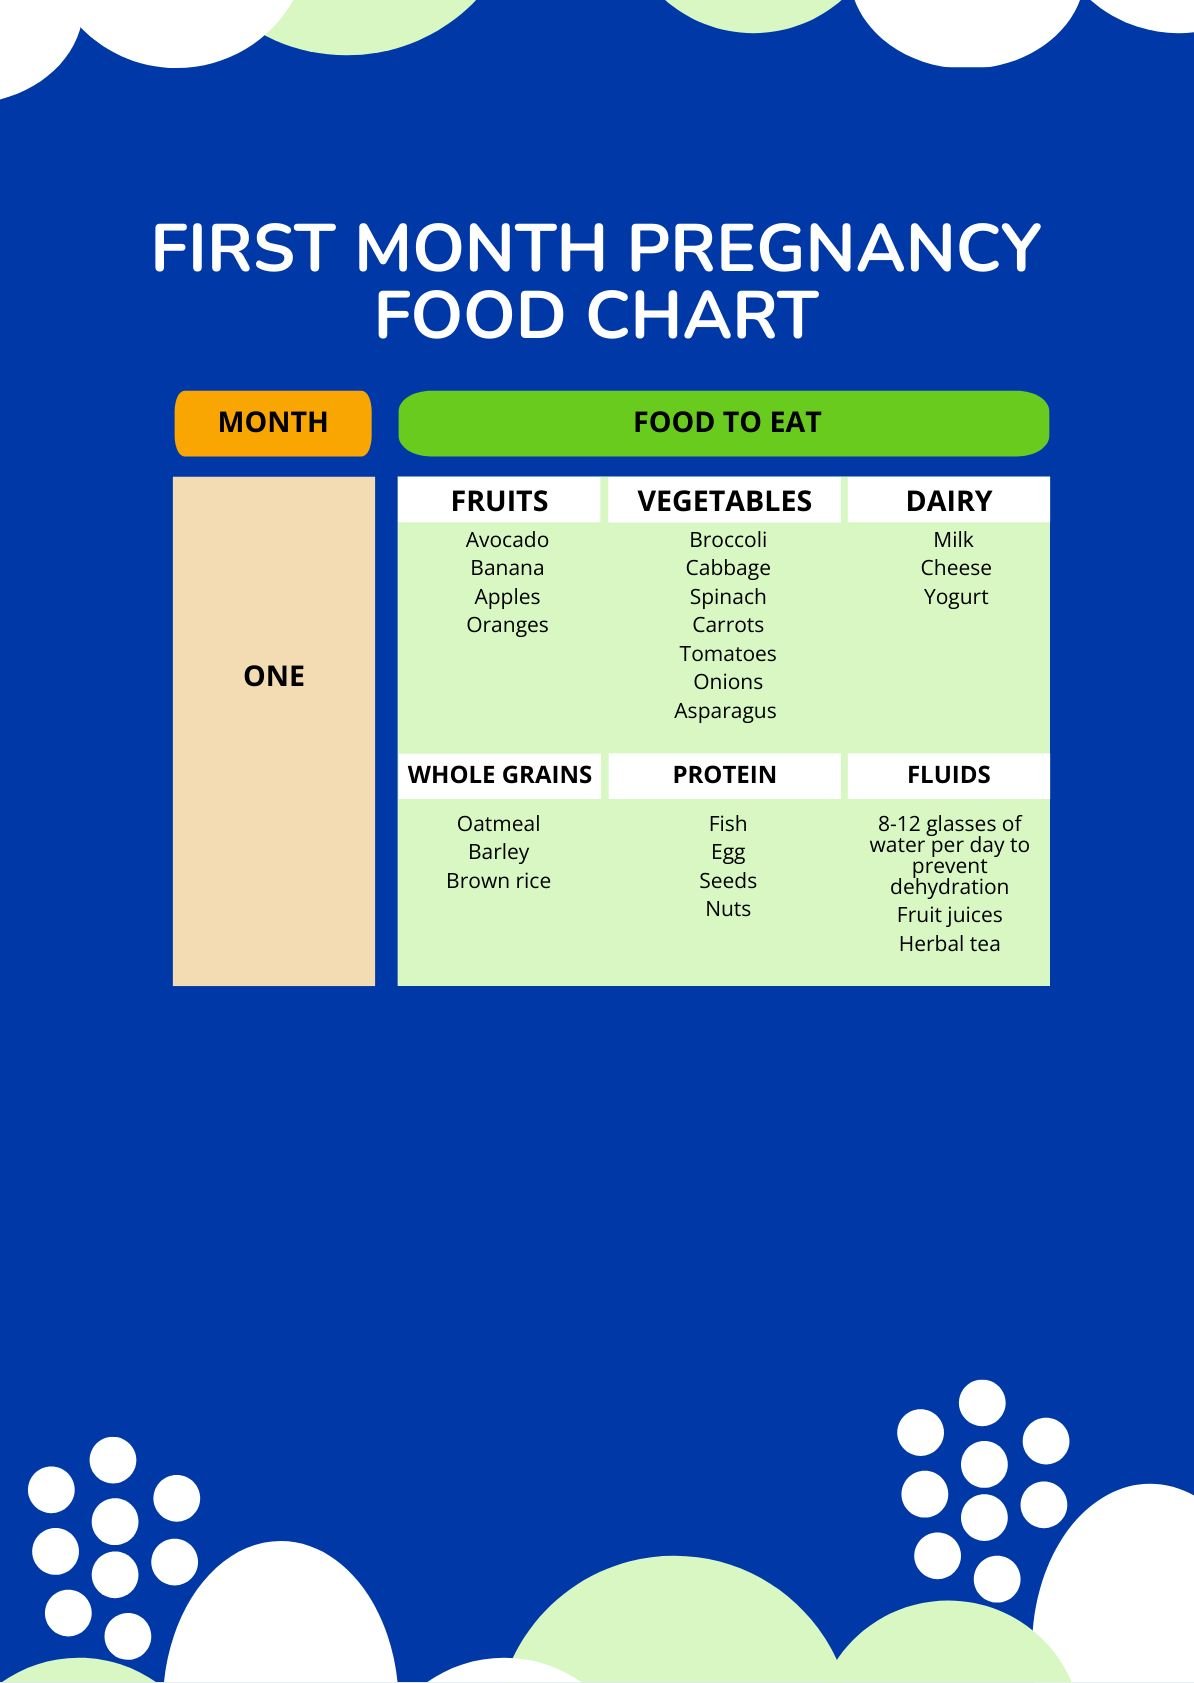 First Month Pregnancy Food Chart in PDF